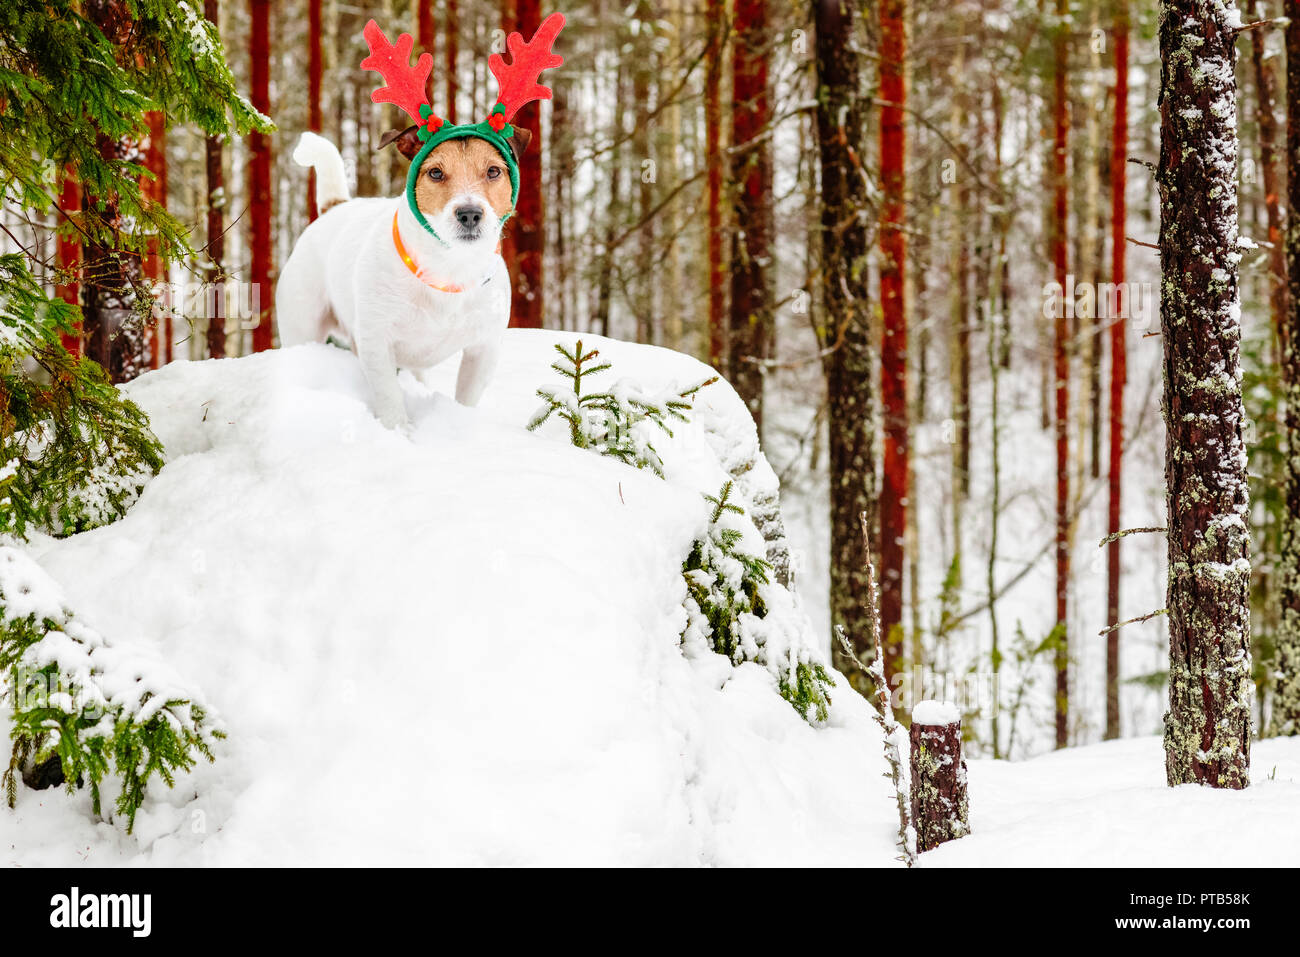 Dog wearing costume of Santa Clause's reindeer Rudolph at winter north Finland forest Stock Photo